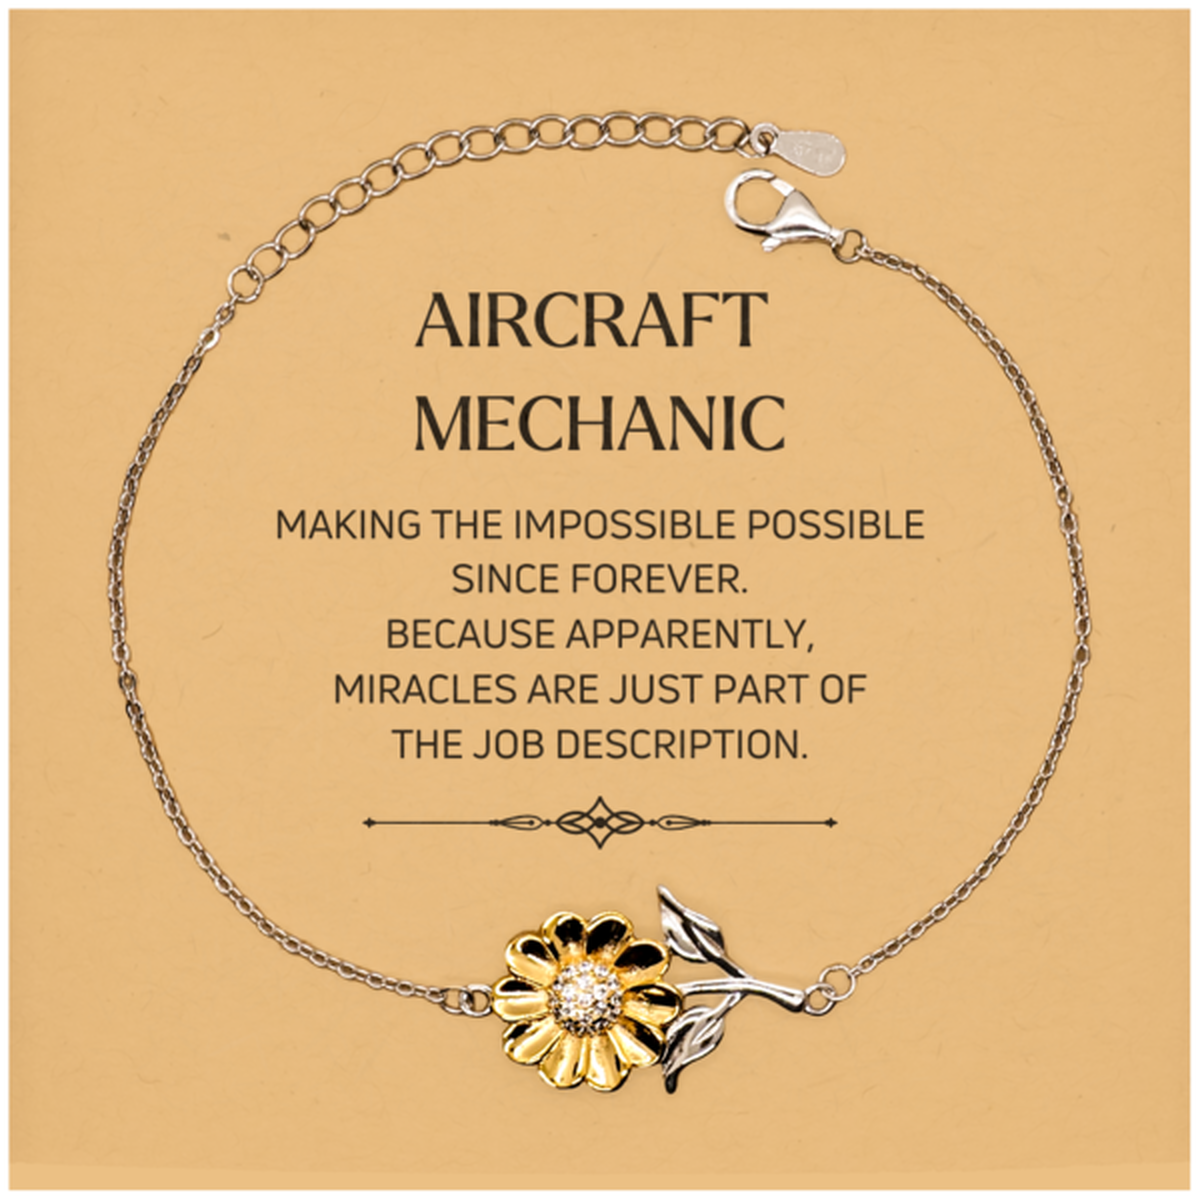 Funny Aircraft Mechanic Gifts, Miracles are just part of the job description, Inspirational Birthday Christmas Sunflower Bracelet For Aircraft Mechanic, Men, Women, Coworkers, Friends, Boss